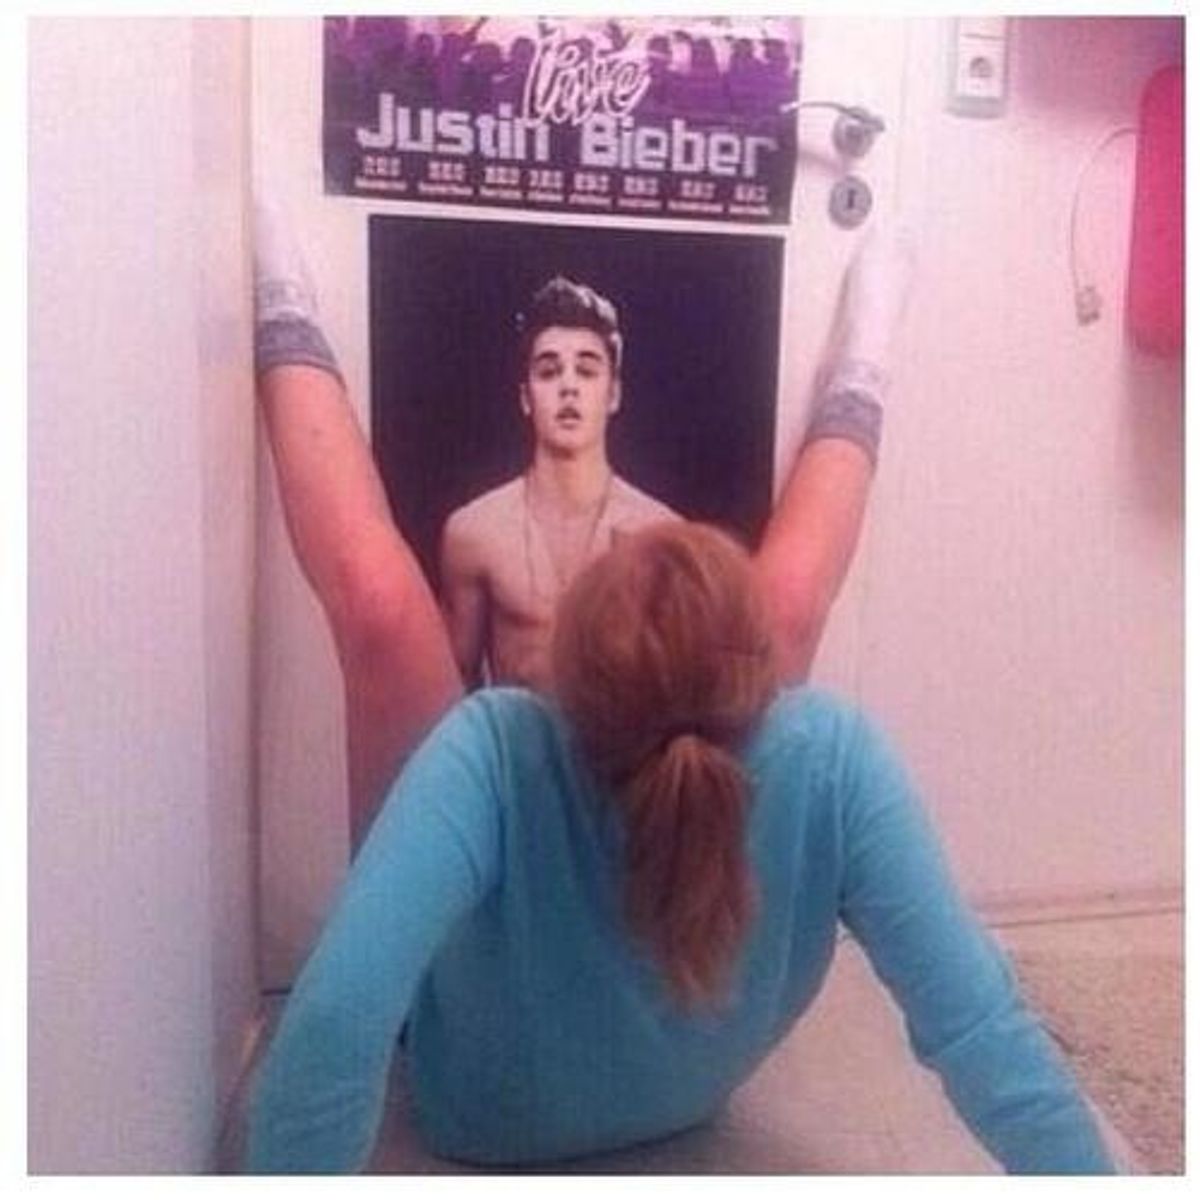 21 Times The Justin Bieber Thirst Was All Too Real